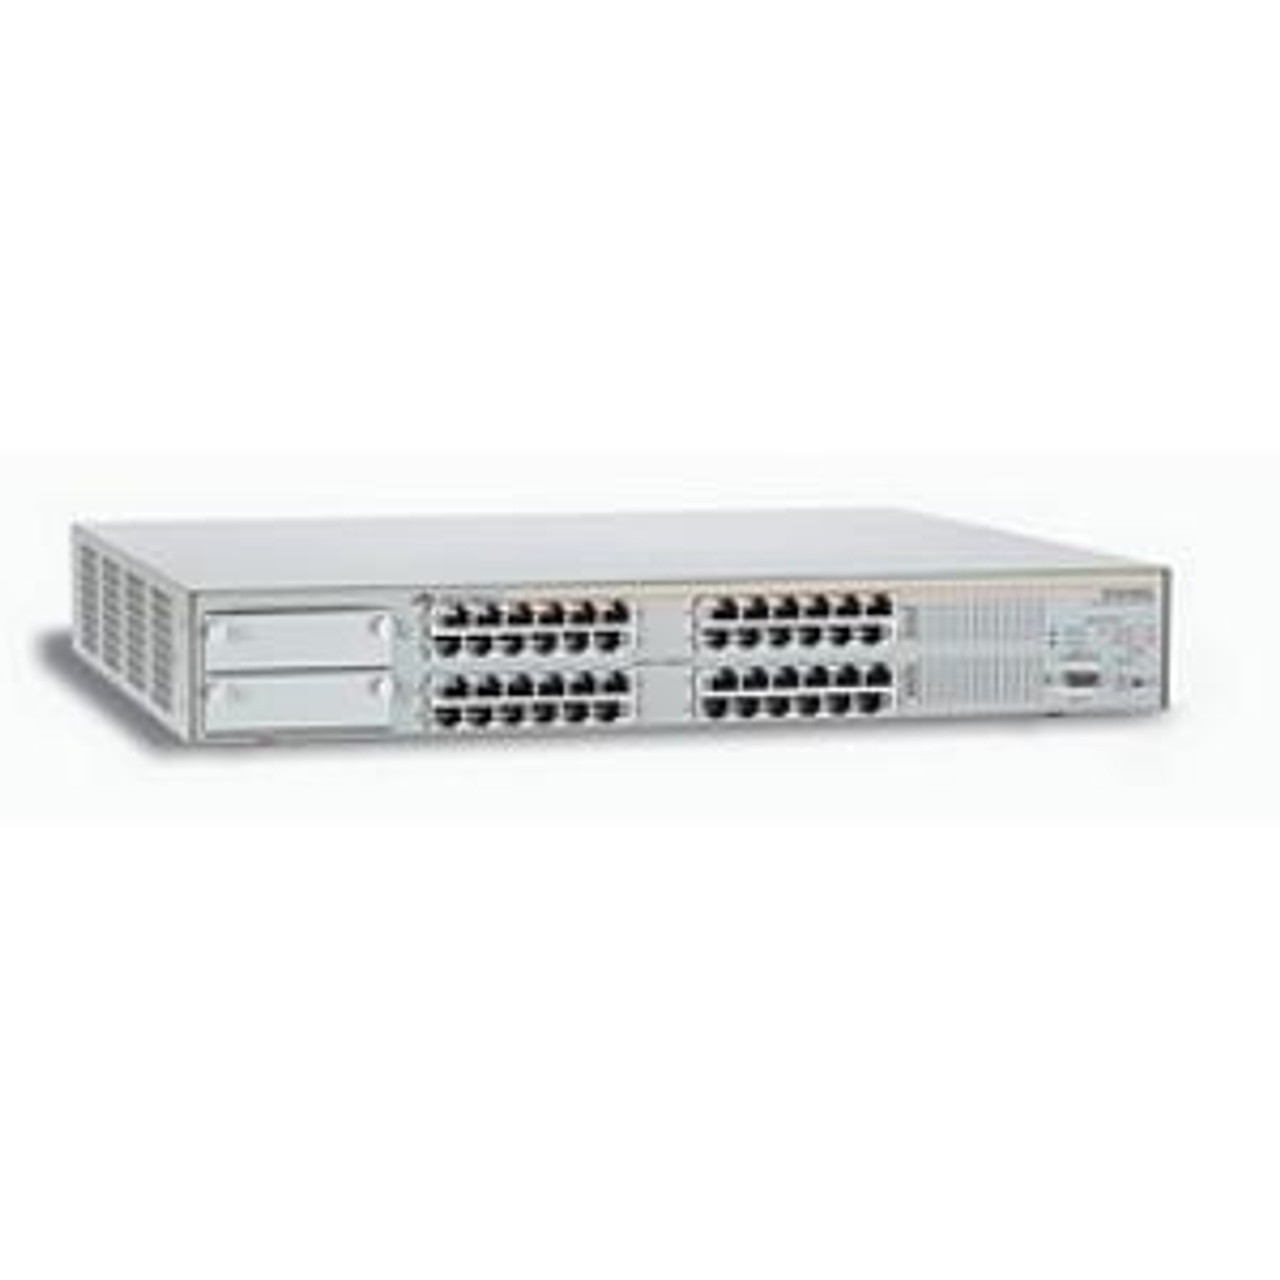 AT-8724XL-40 Allied Telesis AT-8724XL Layer 3 Switch (Refurbished)